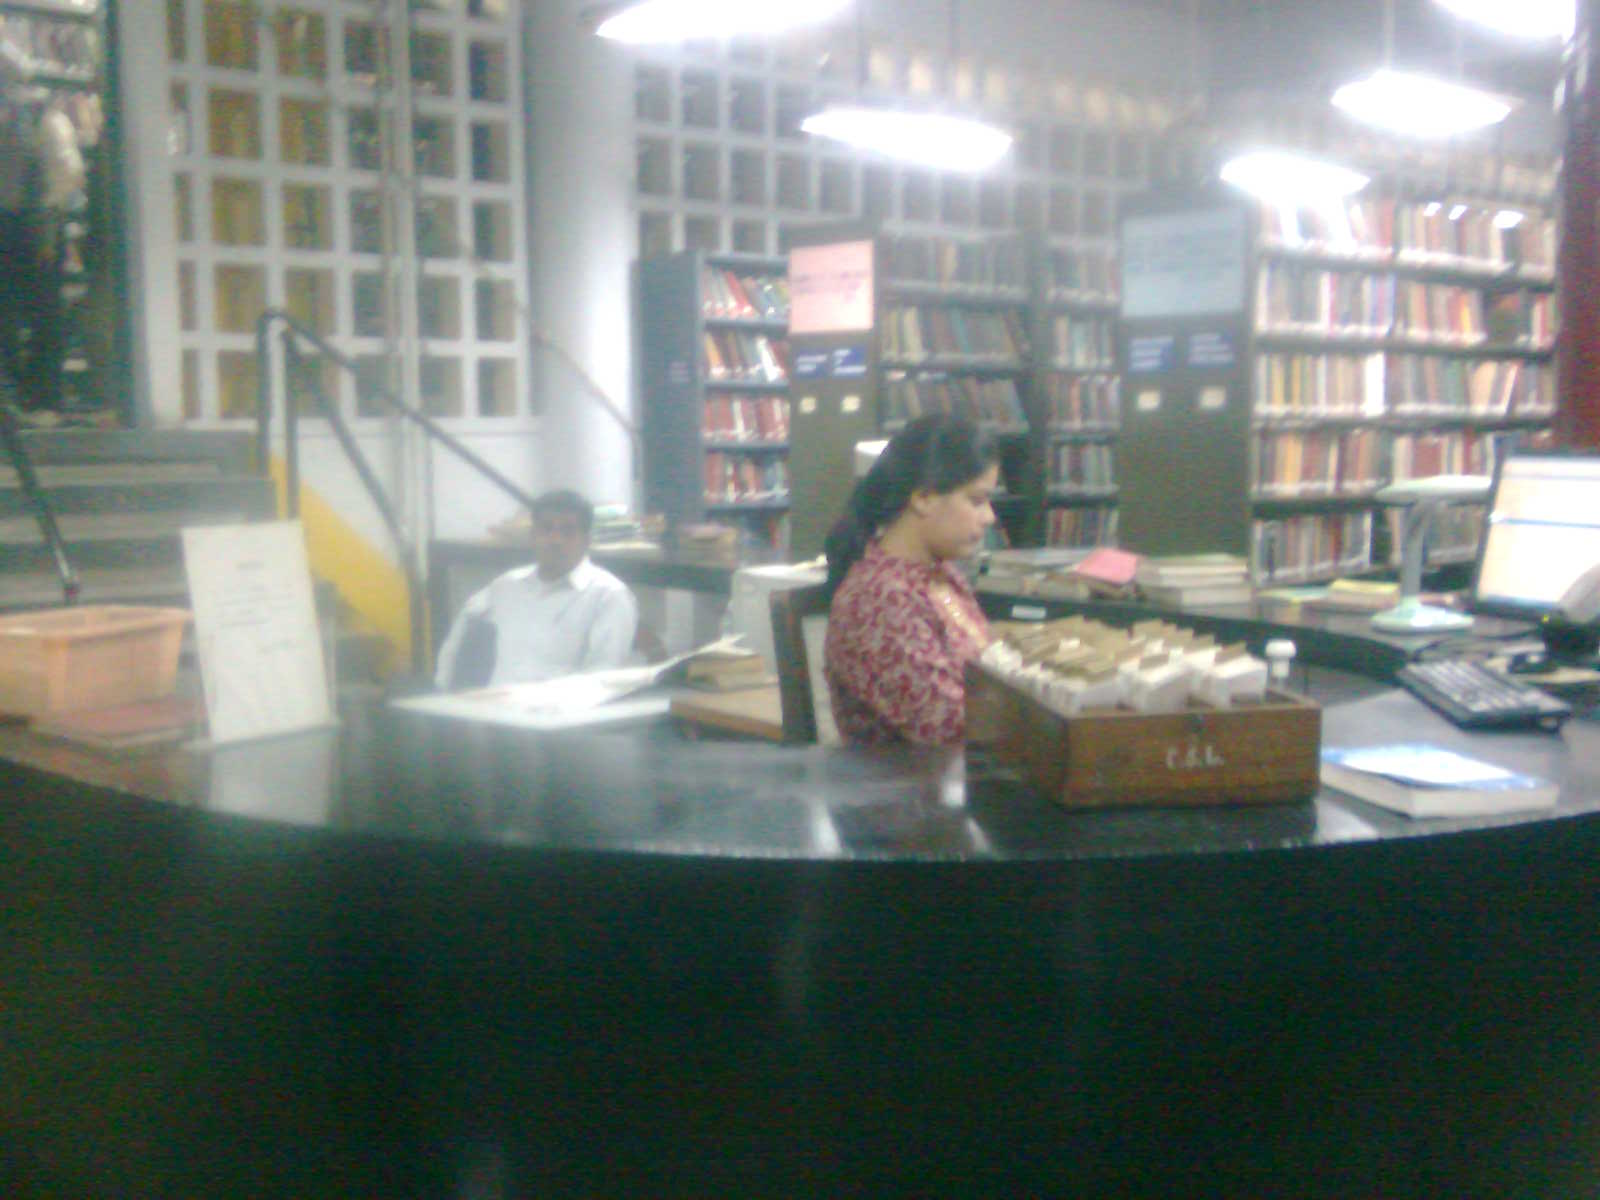 Circulation Counter, Central State Library, Chandigarh